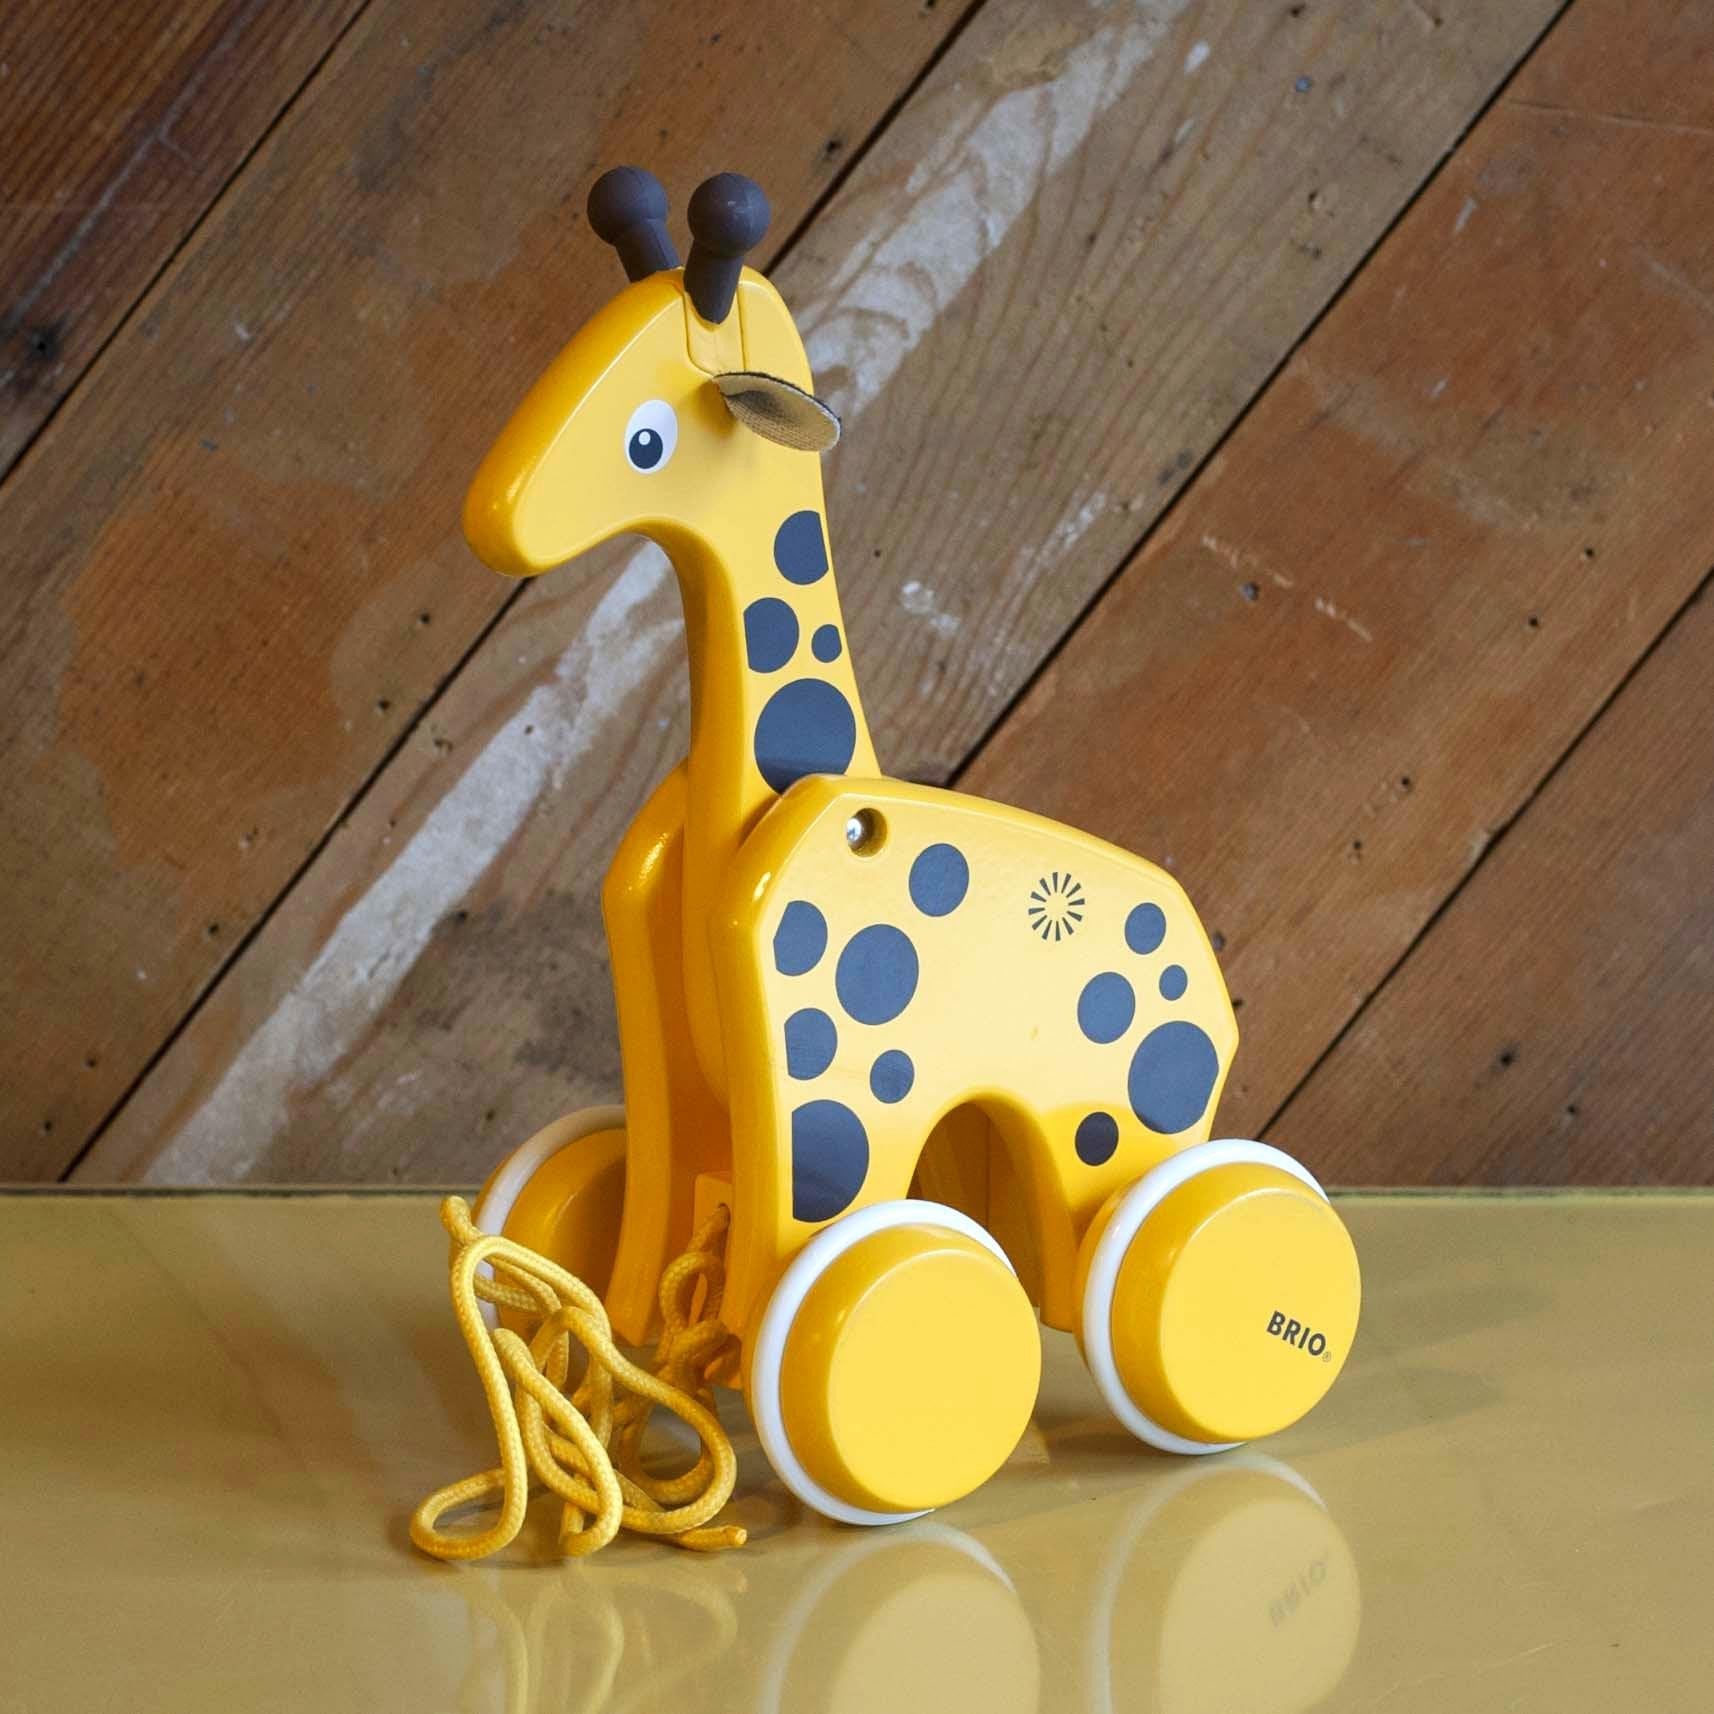 wooden, yellow giraffe pull toy on wooden back ground